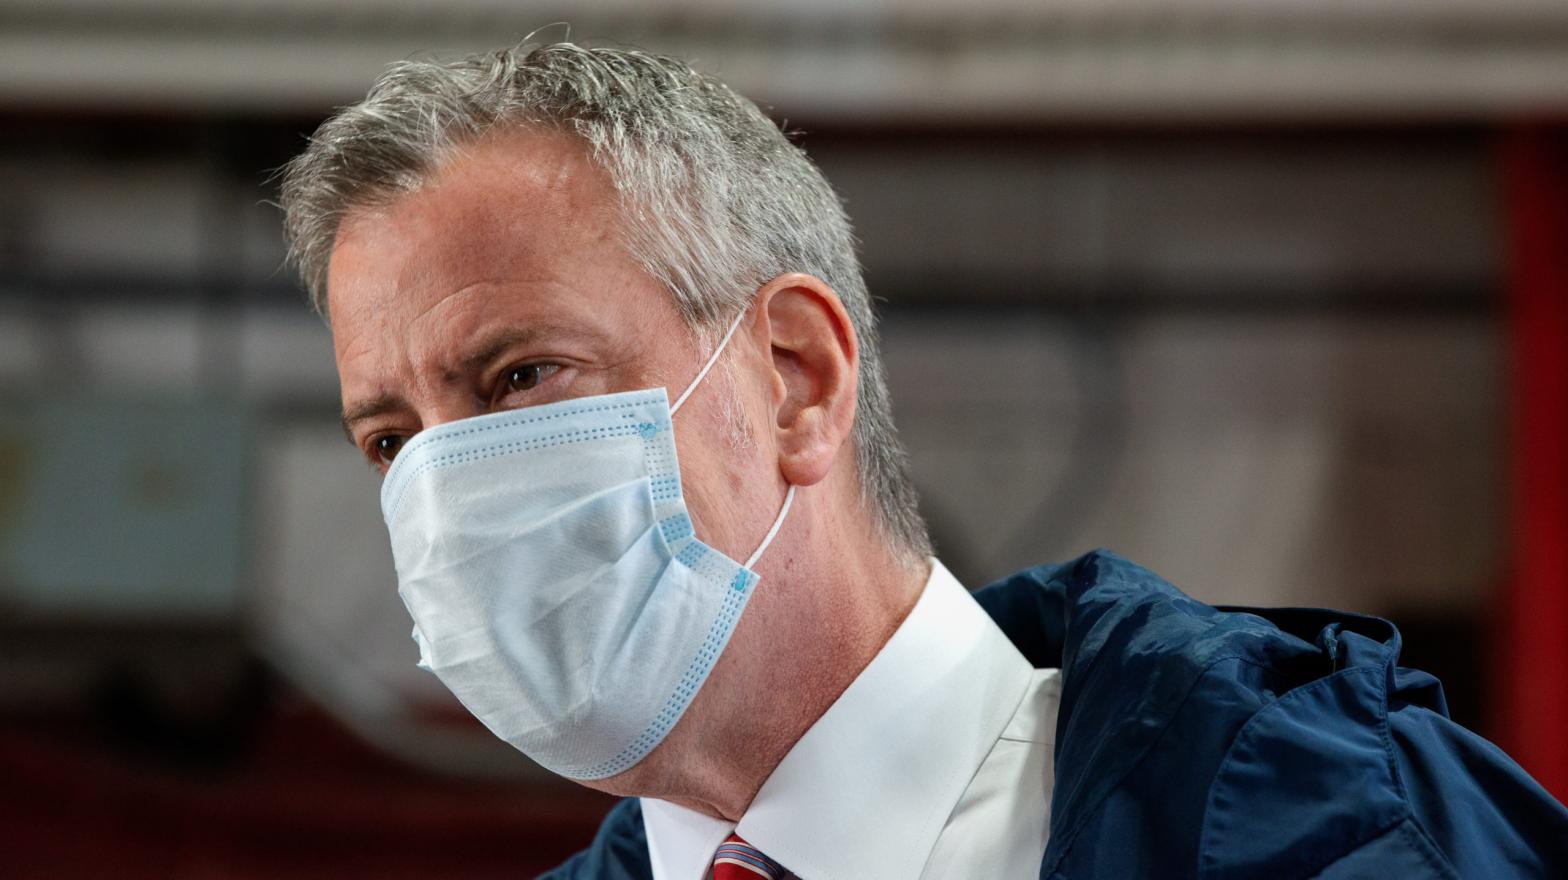 New York City Mayor Bill DeBlasio speaks to firefighters on May 4, 2020, in New York City.  (Photo: Bryan Thomas, Getty Images)